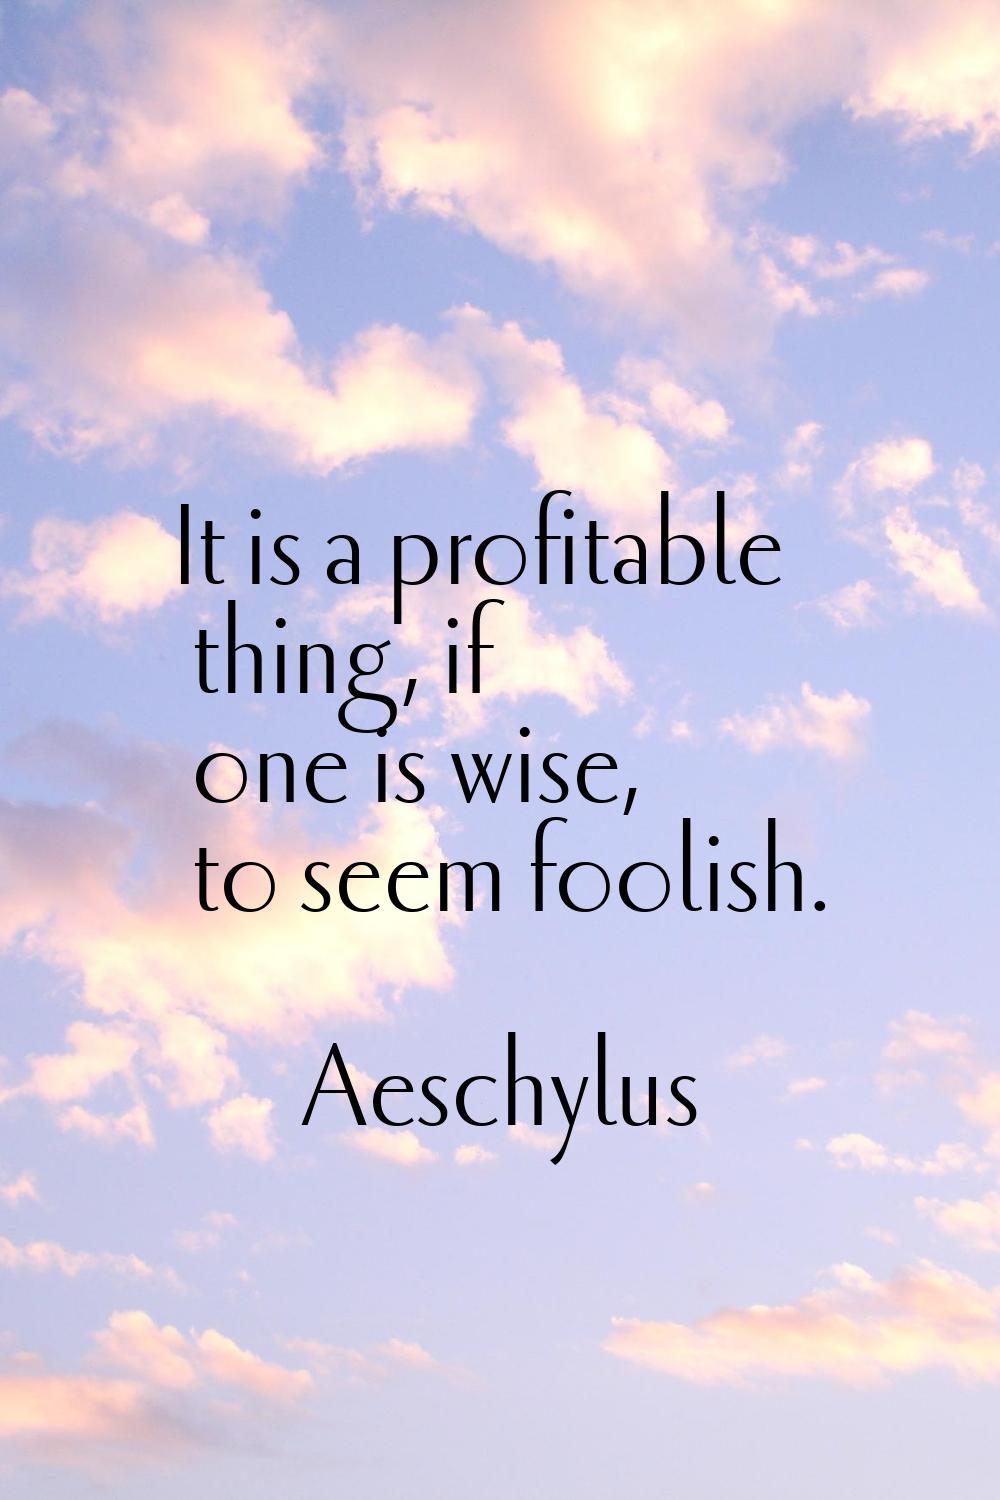 It is a profitable thing, if one is wise, to seem foolish.